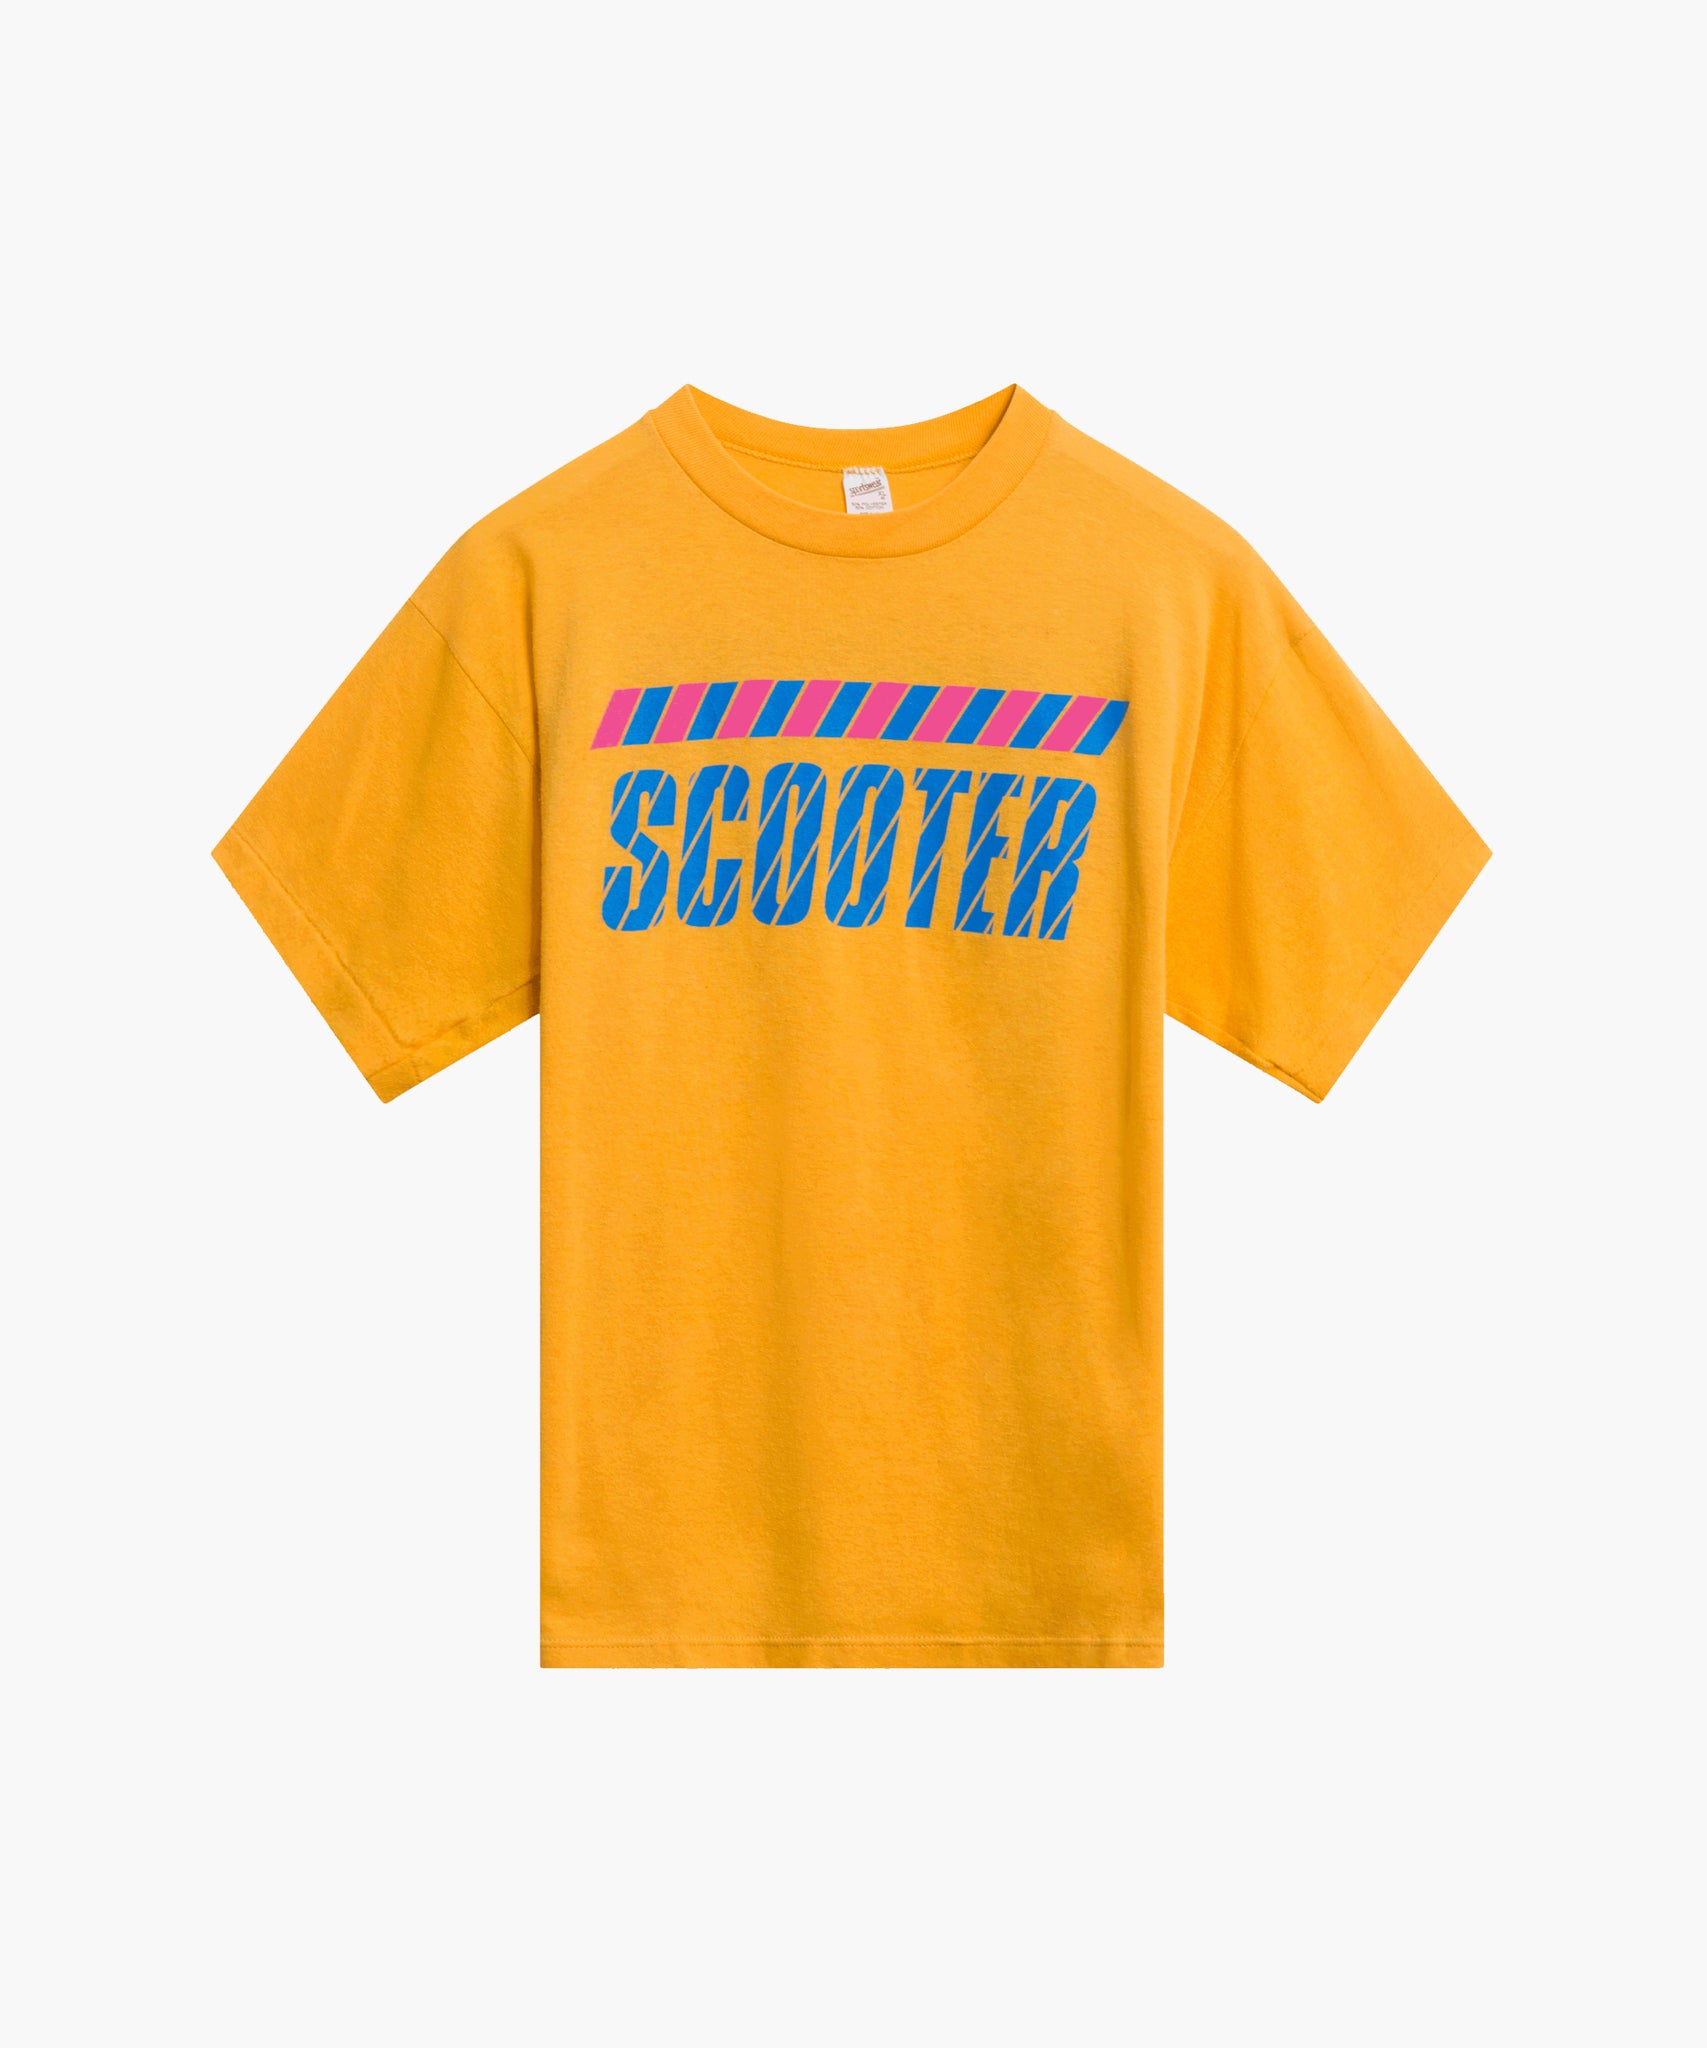 Vintage Scooter 80s Single Stitch - Yellow